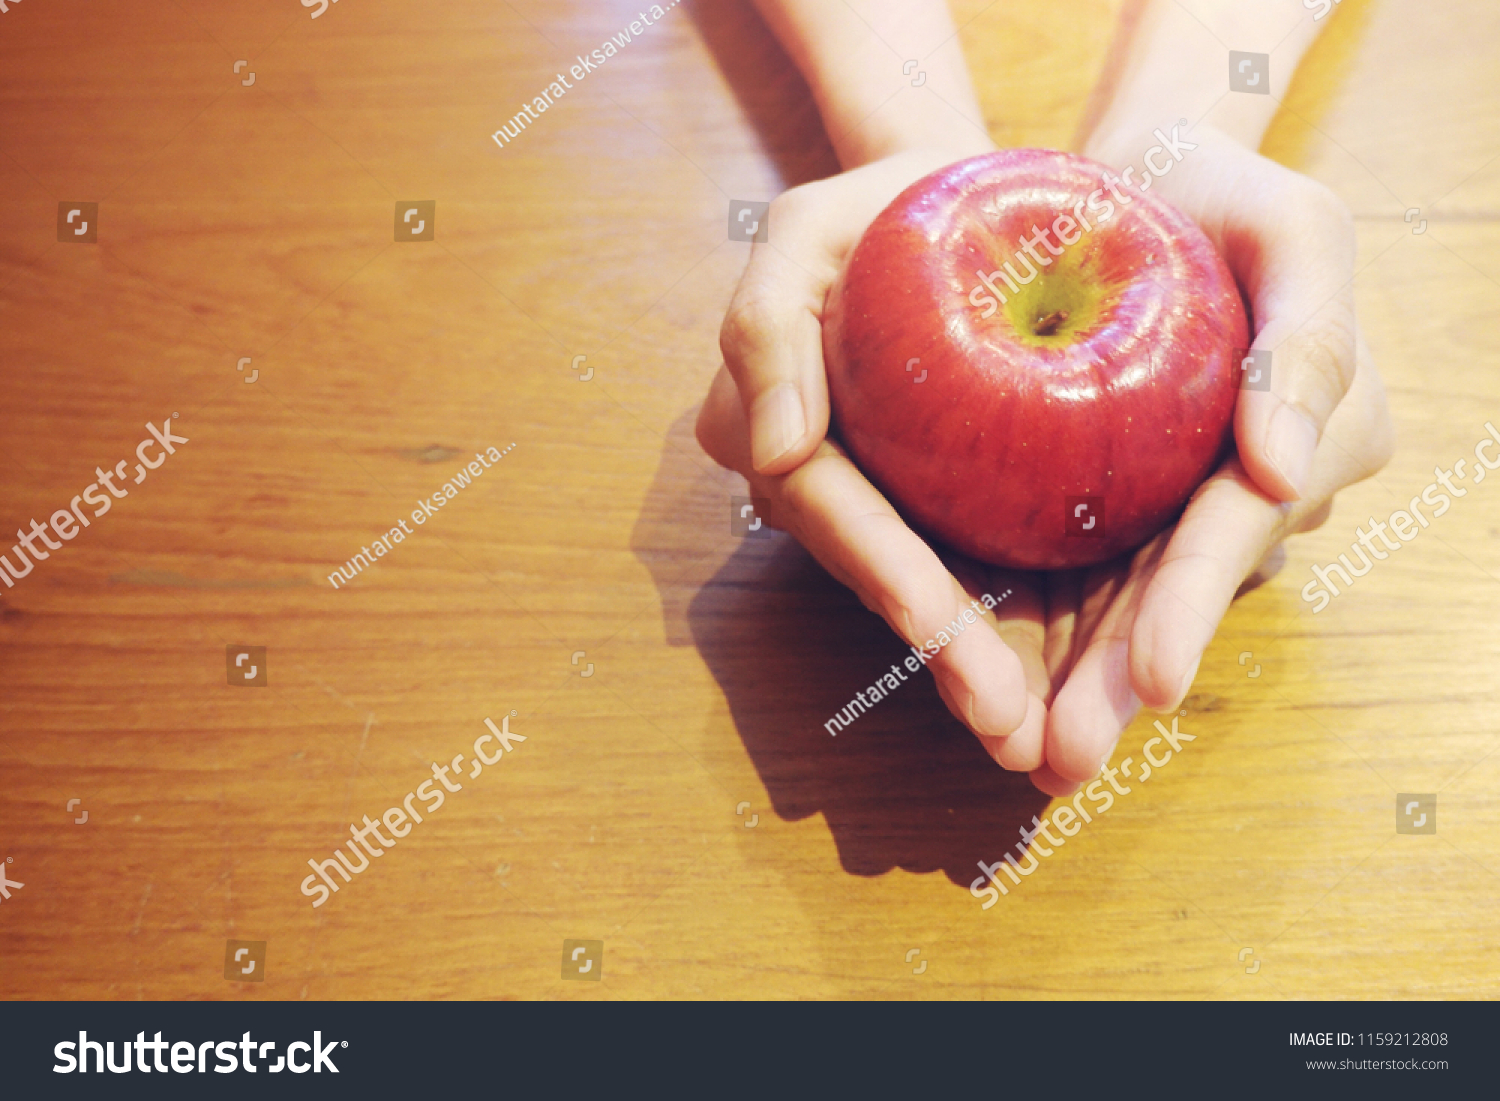 Hand holding red apple on wood table background, love yourself concept, healthy medical, you are what you eat concept,fruits, healthcare #1159212808